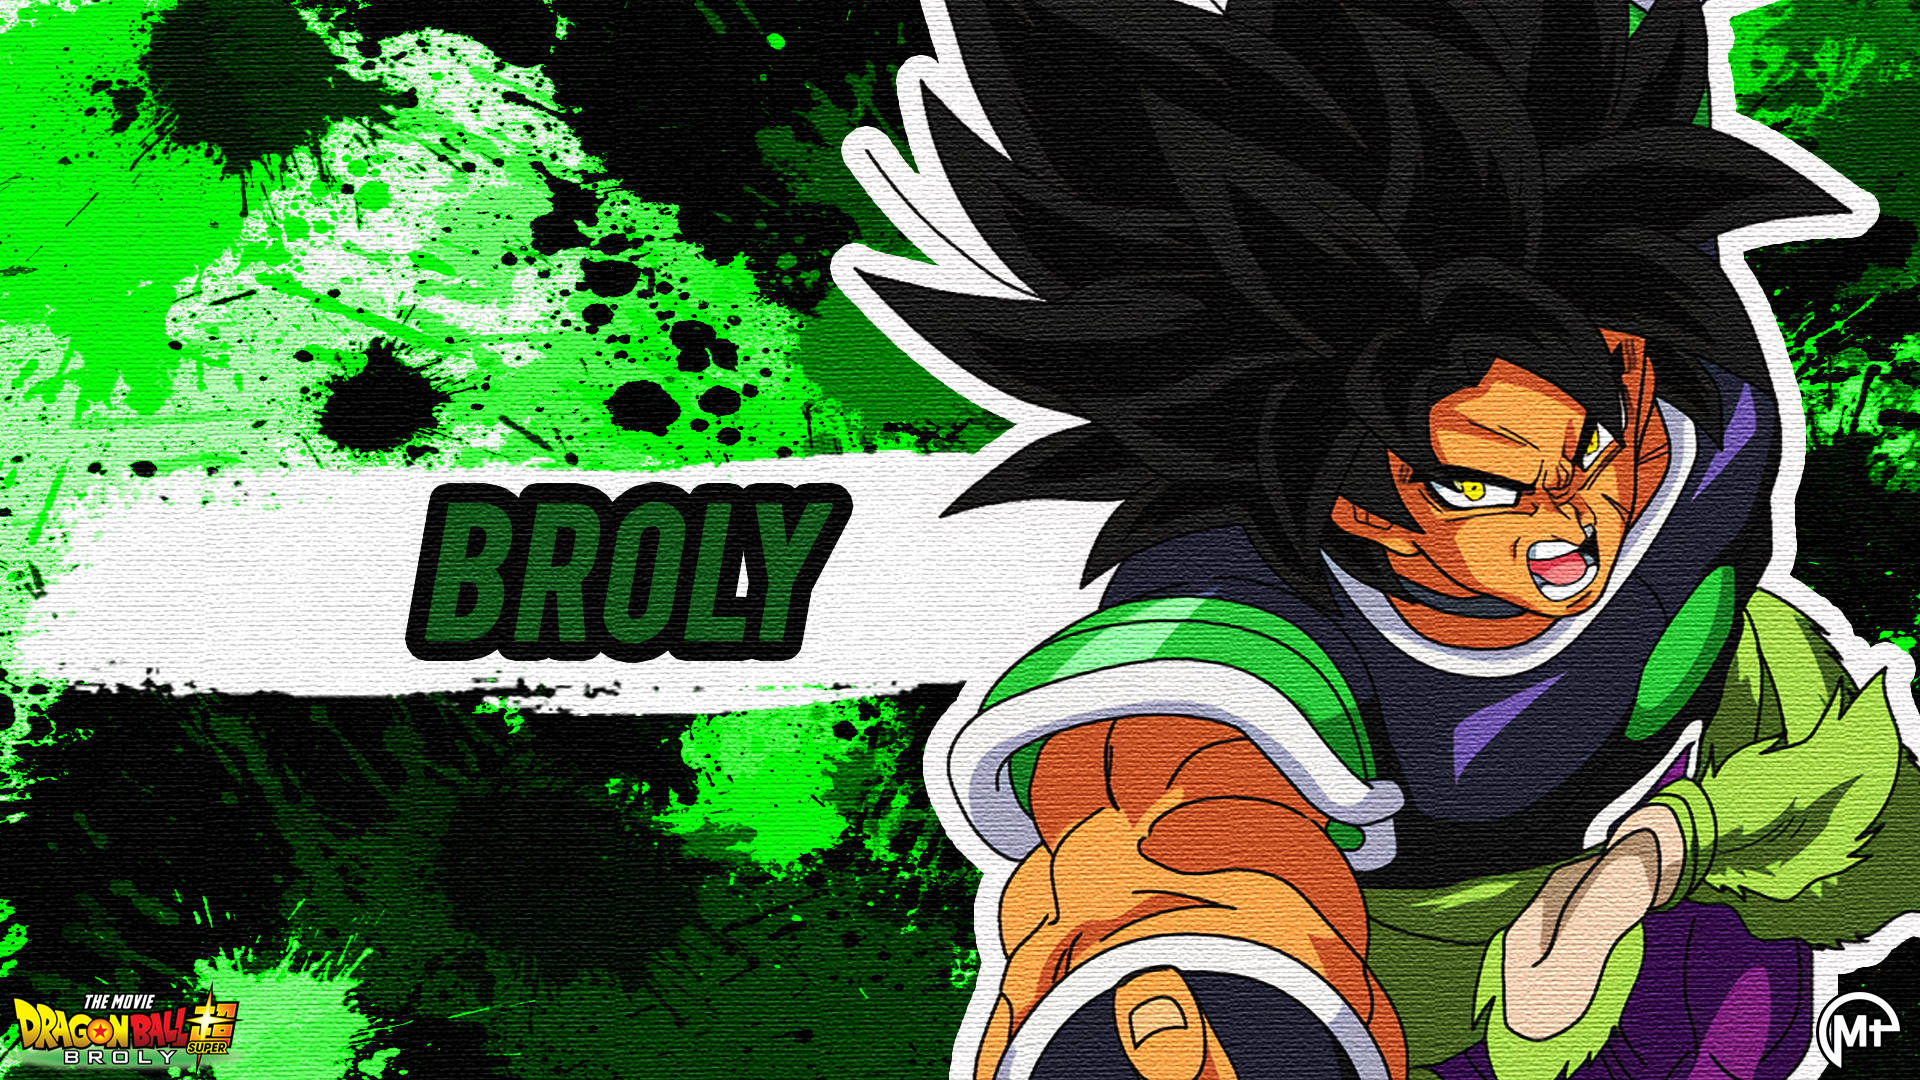 Broly Poster Of Dragon Ball Super Broly Background